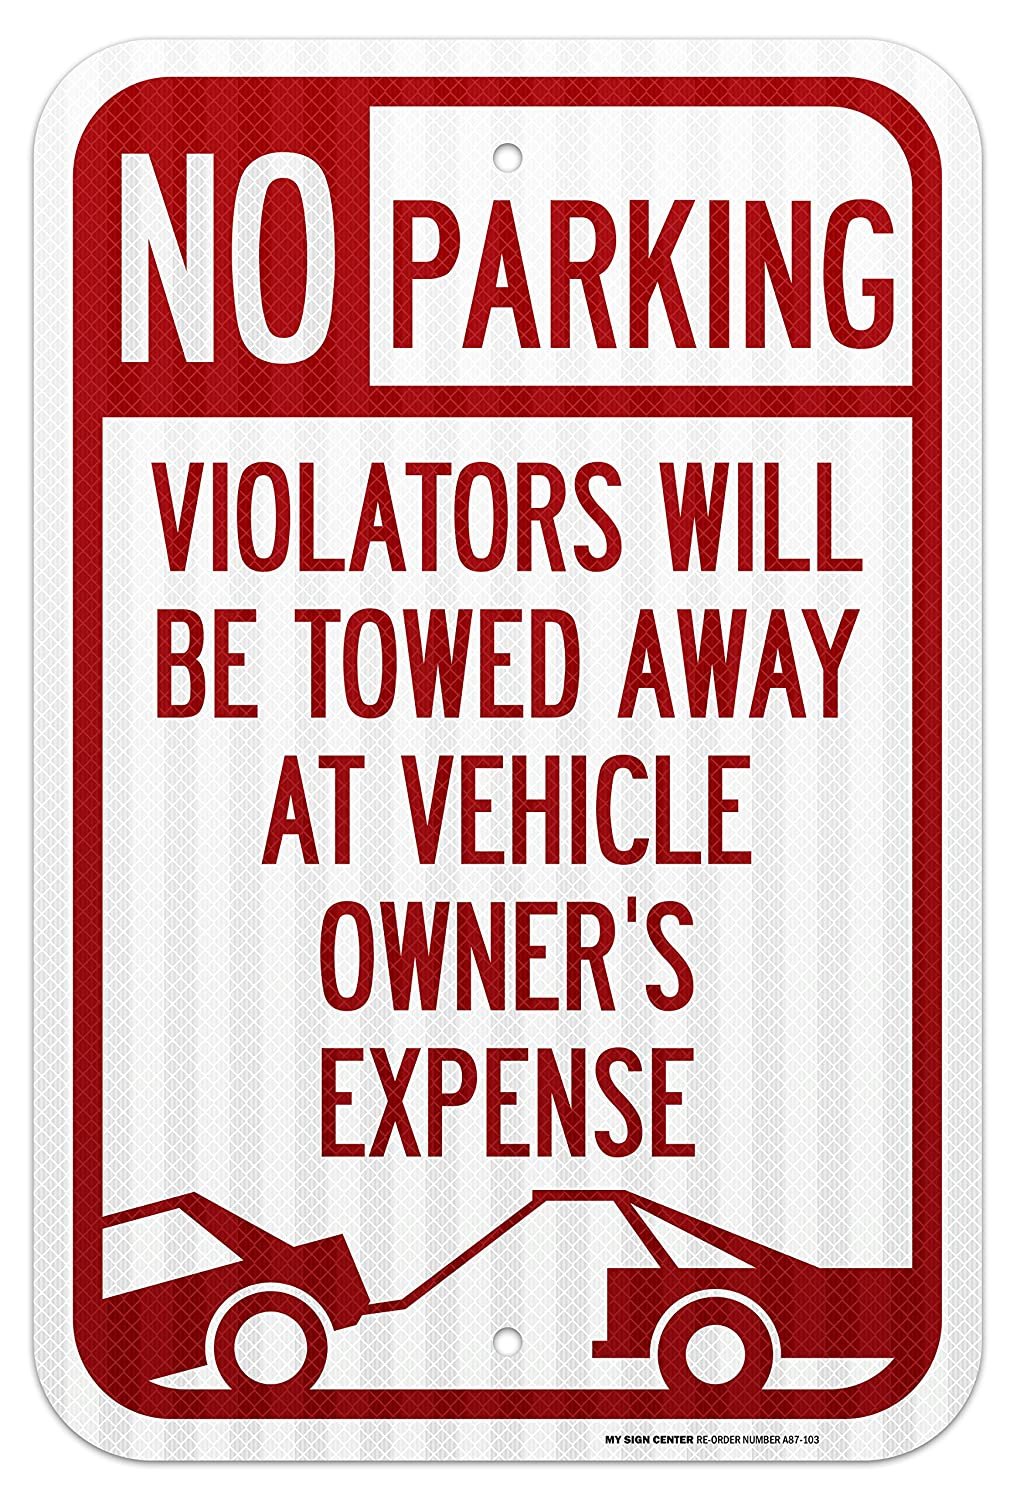 No Parking Violators Will Be Towed Away at Vehicle Owner's Expense Sign